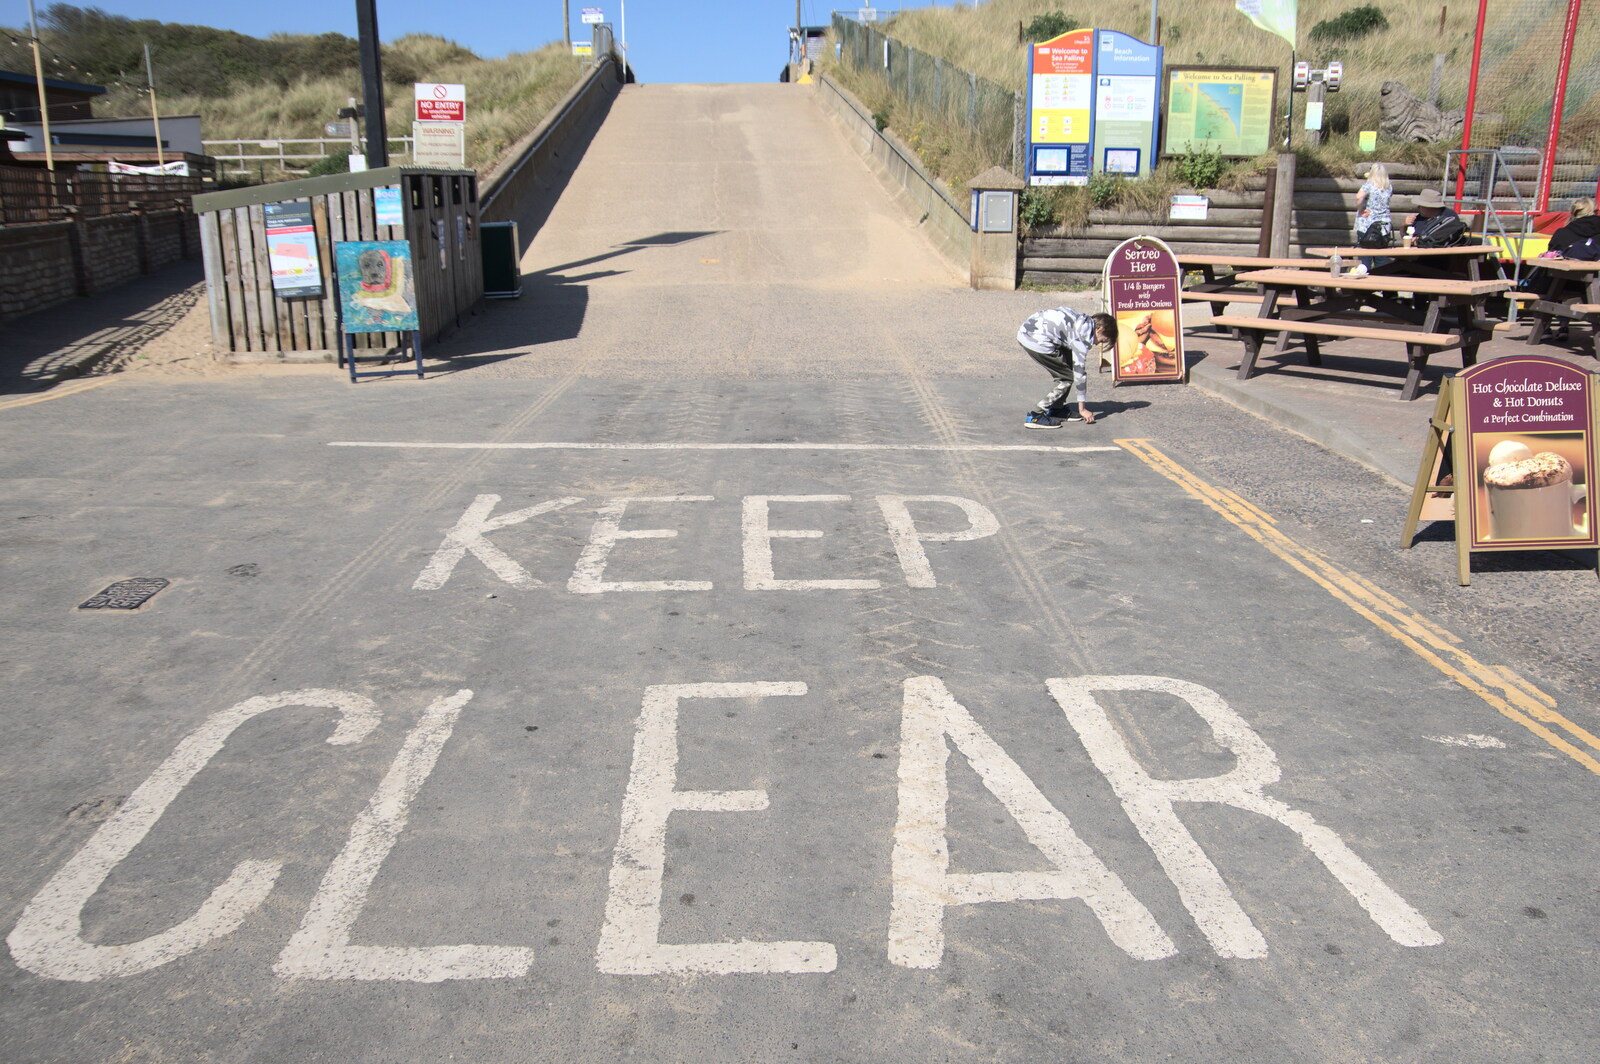 Harry picks some up near a big Keep Clear sign from On the Beach at Sea Palling, Norfolk - 8th May 2022